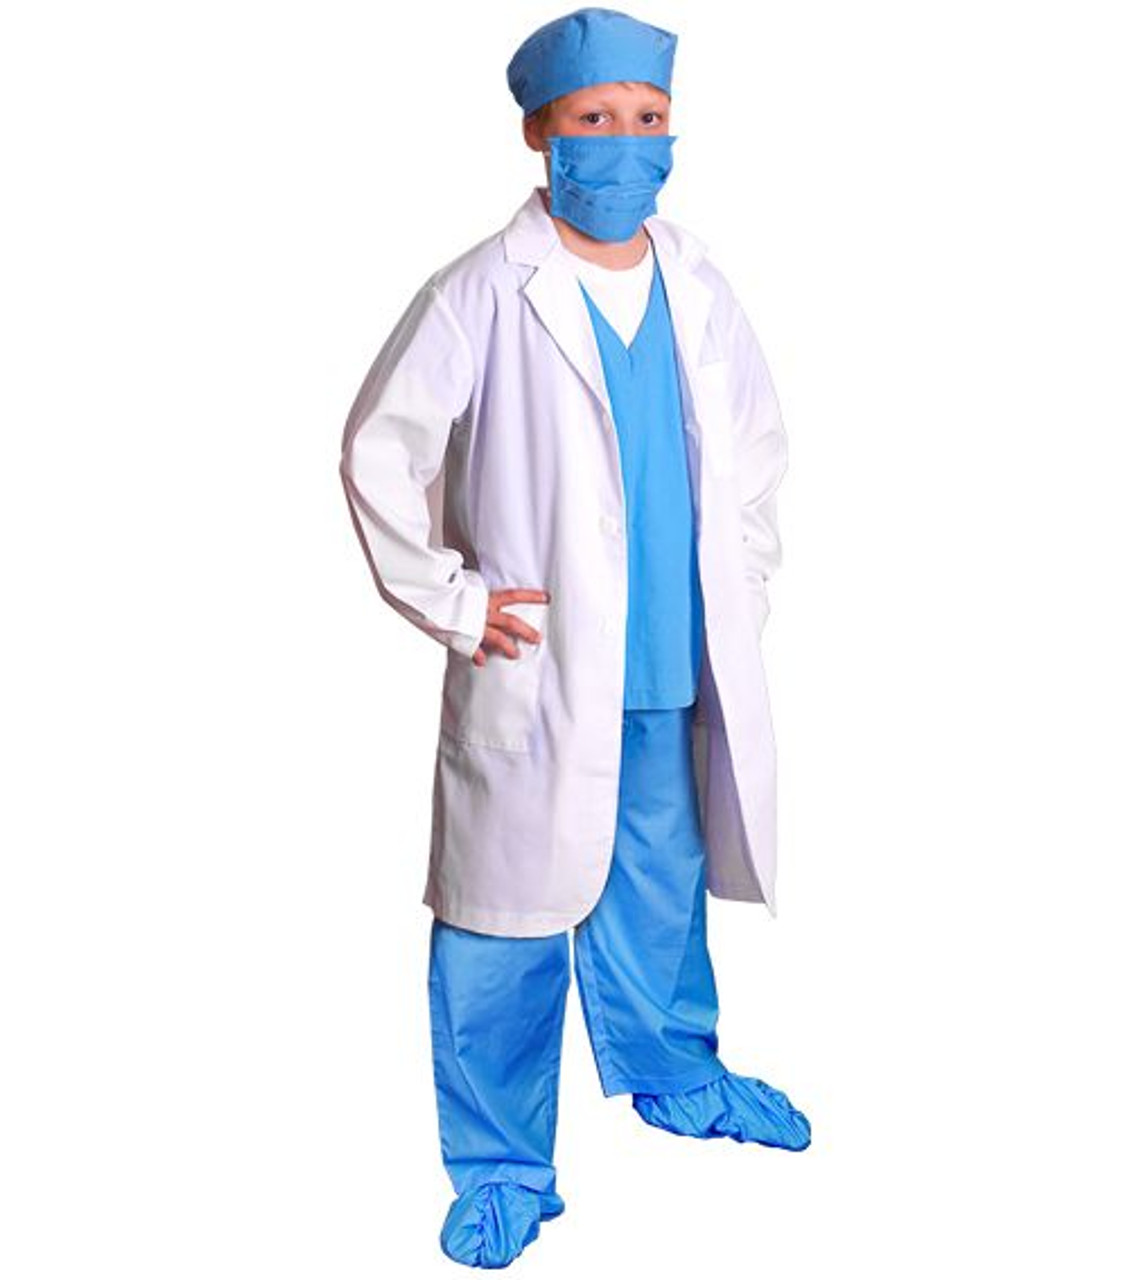 Personalized Kids Doctor Costume - Blue